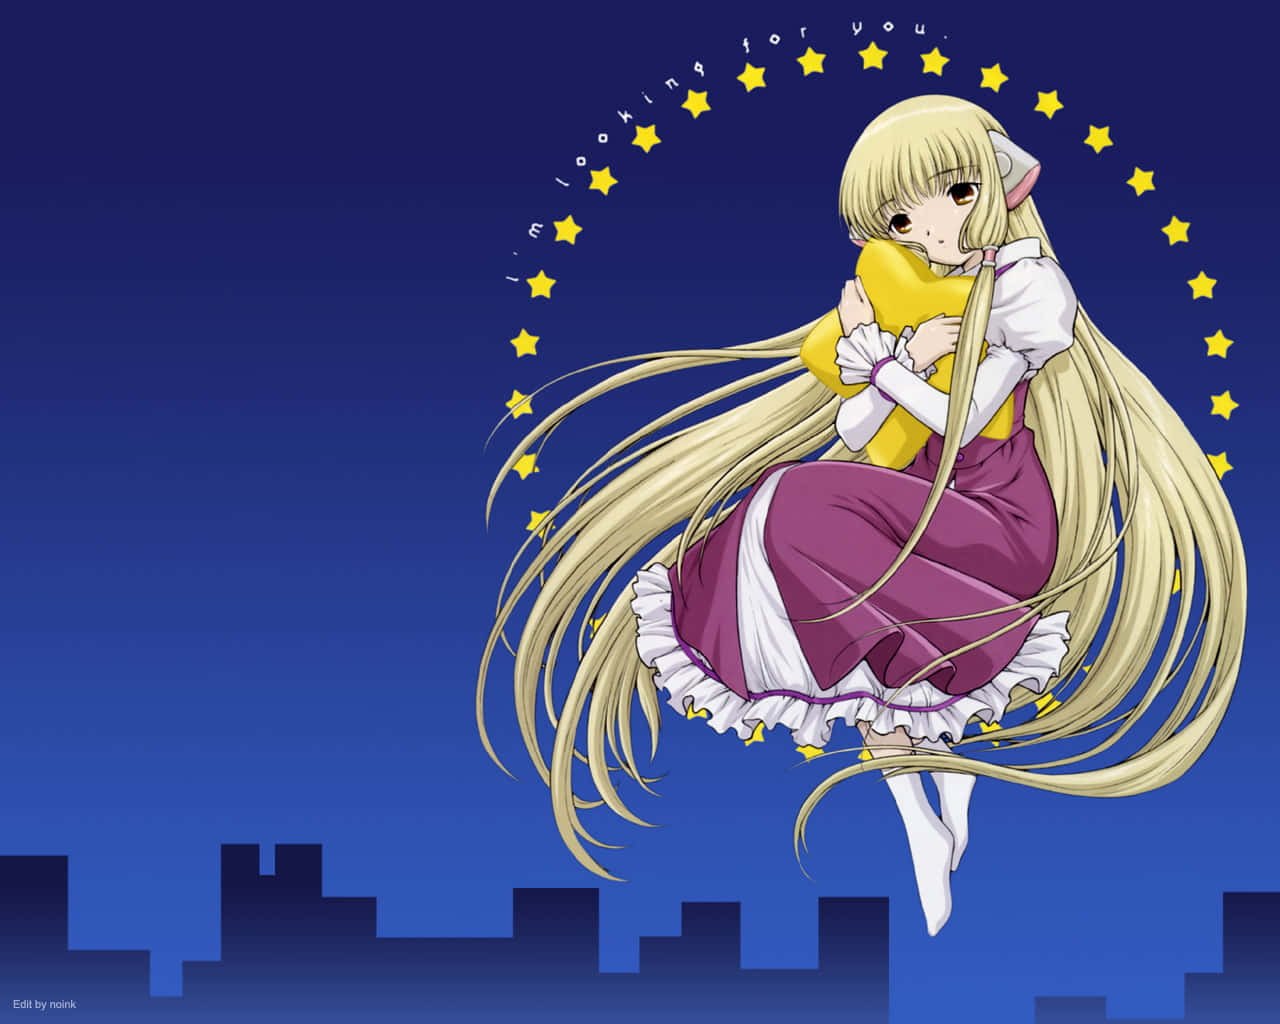 Chobits wires - Anime Feminist